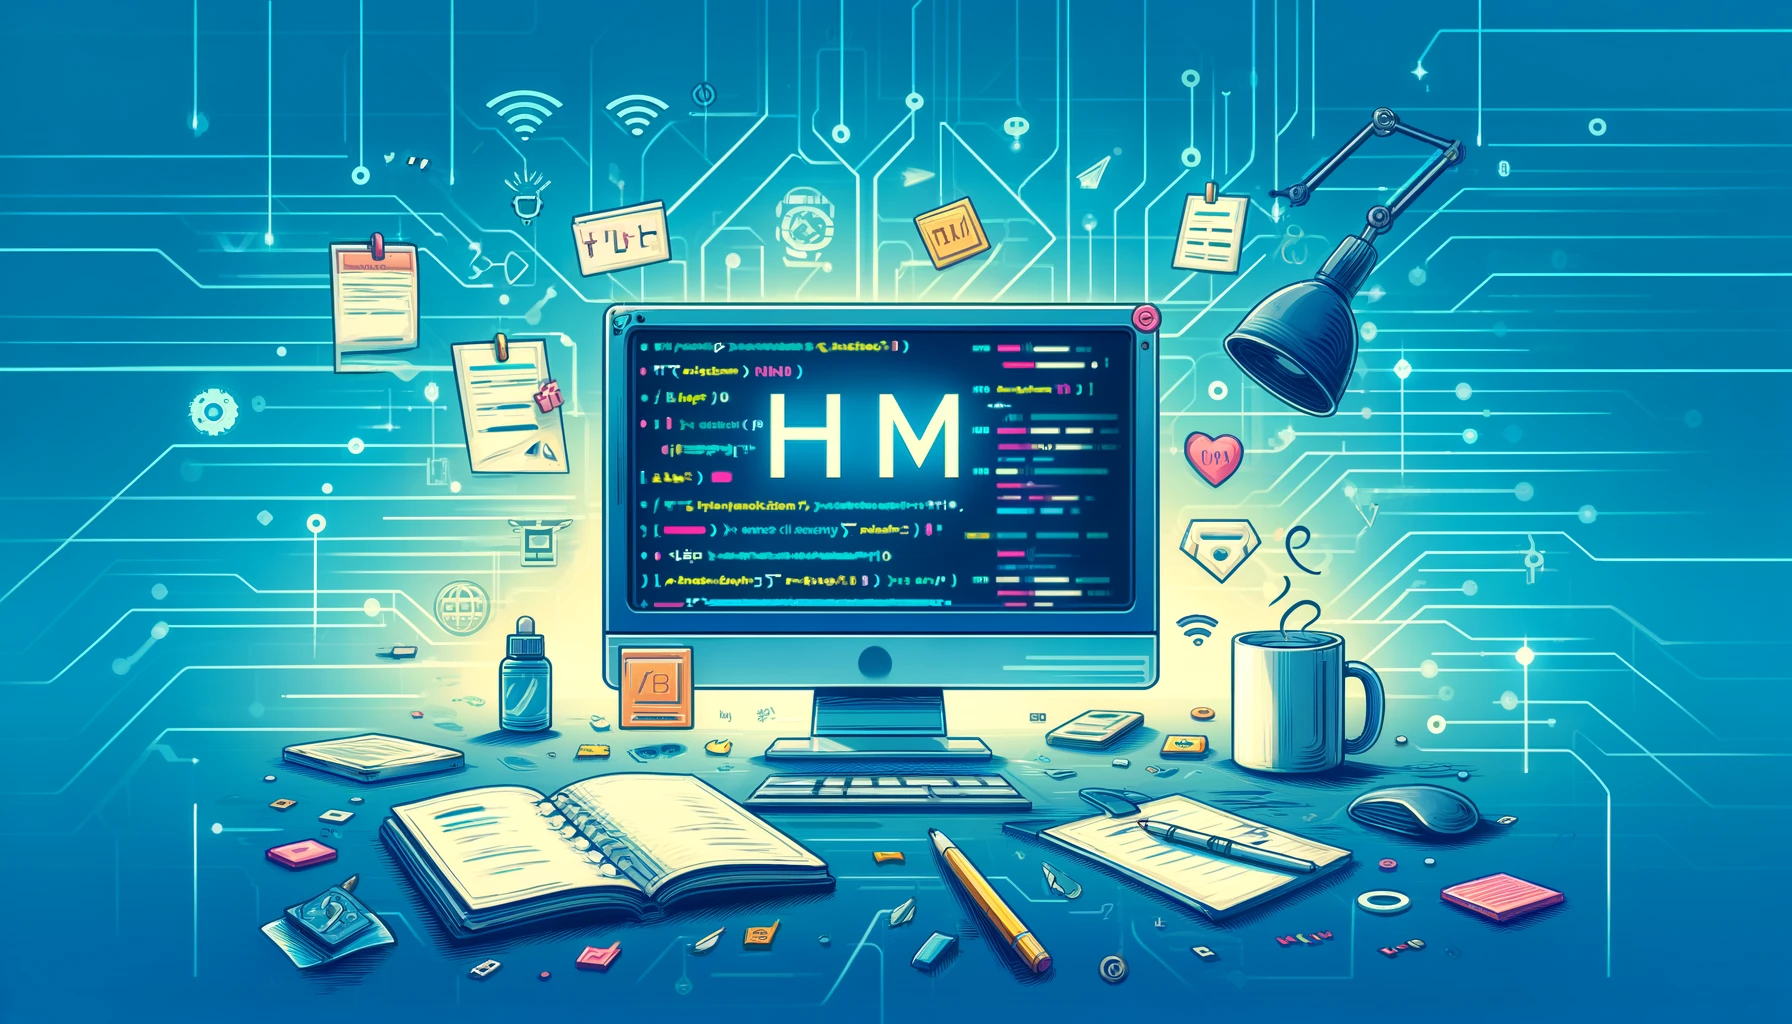 Mastering HTML in the Internet Age: Why Knowing the Essentials Matters